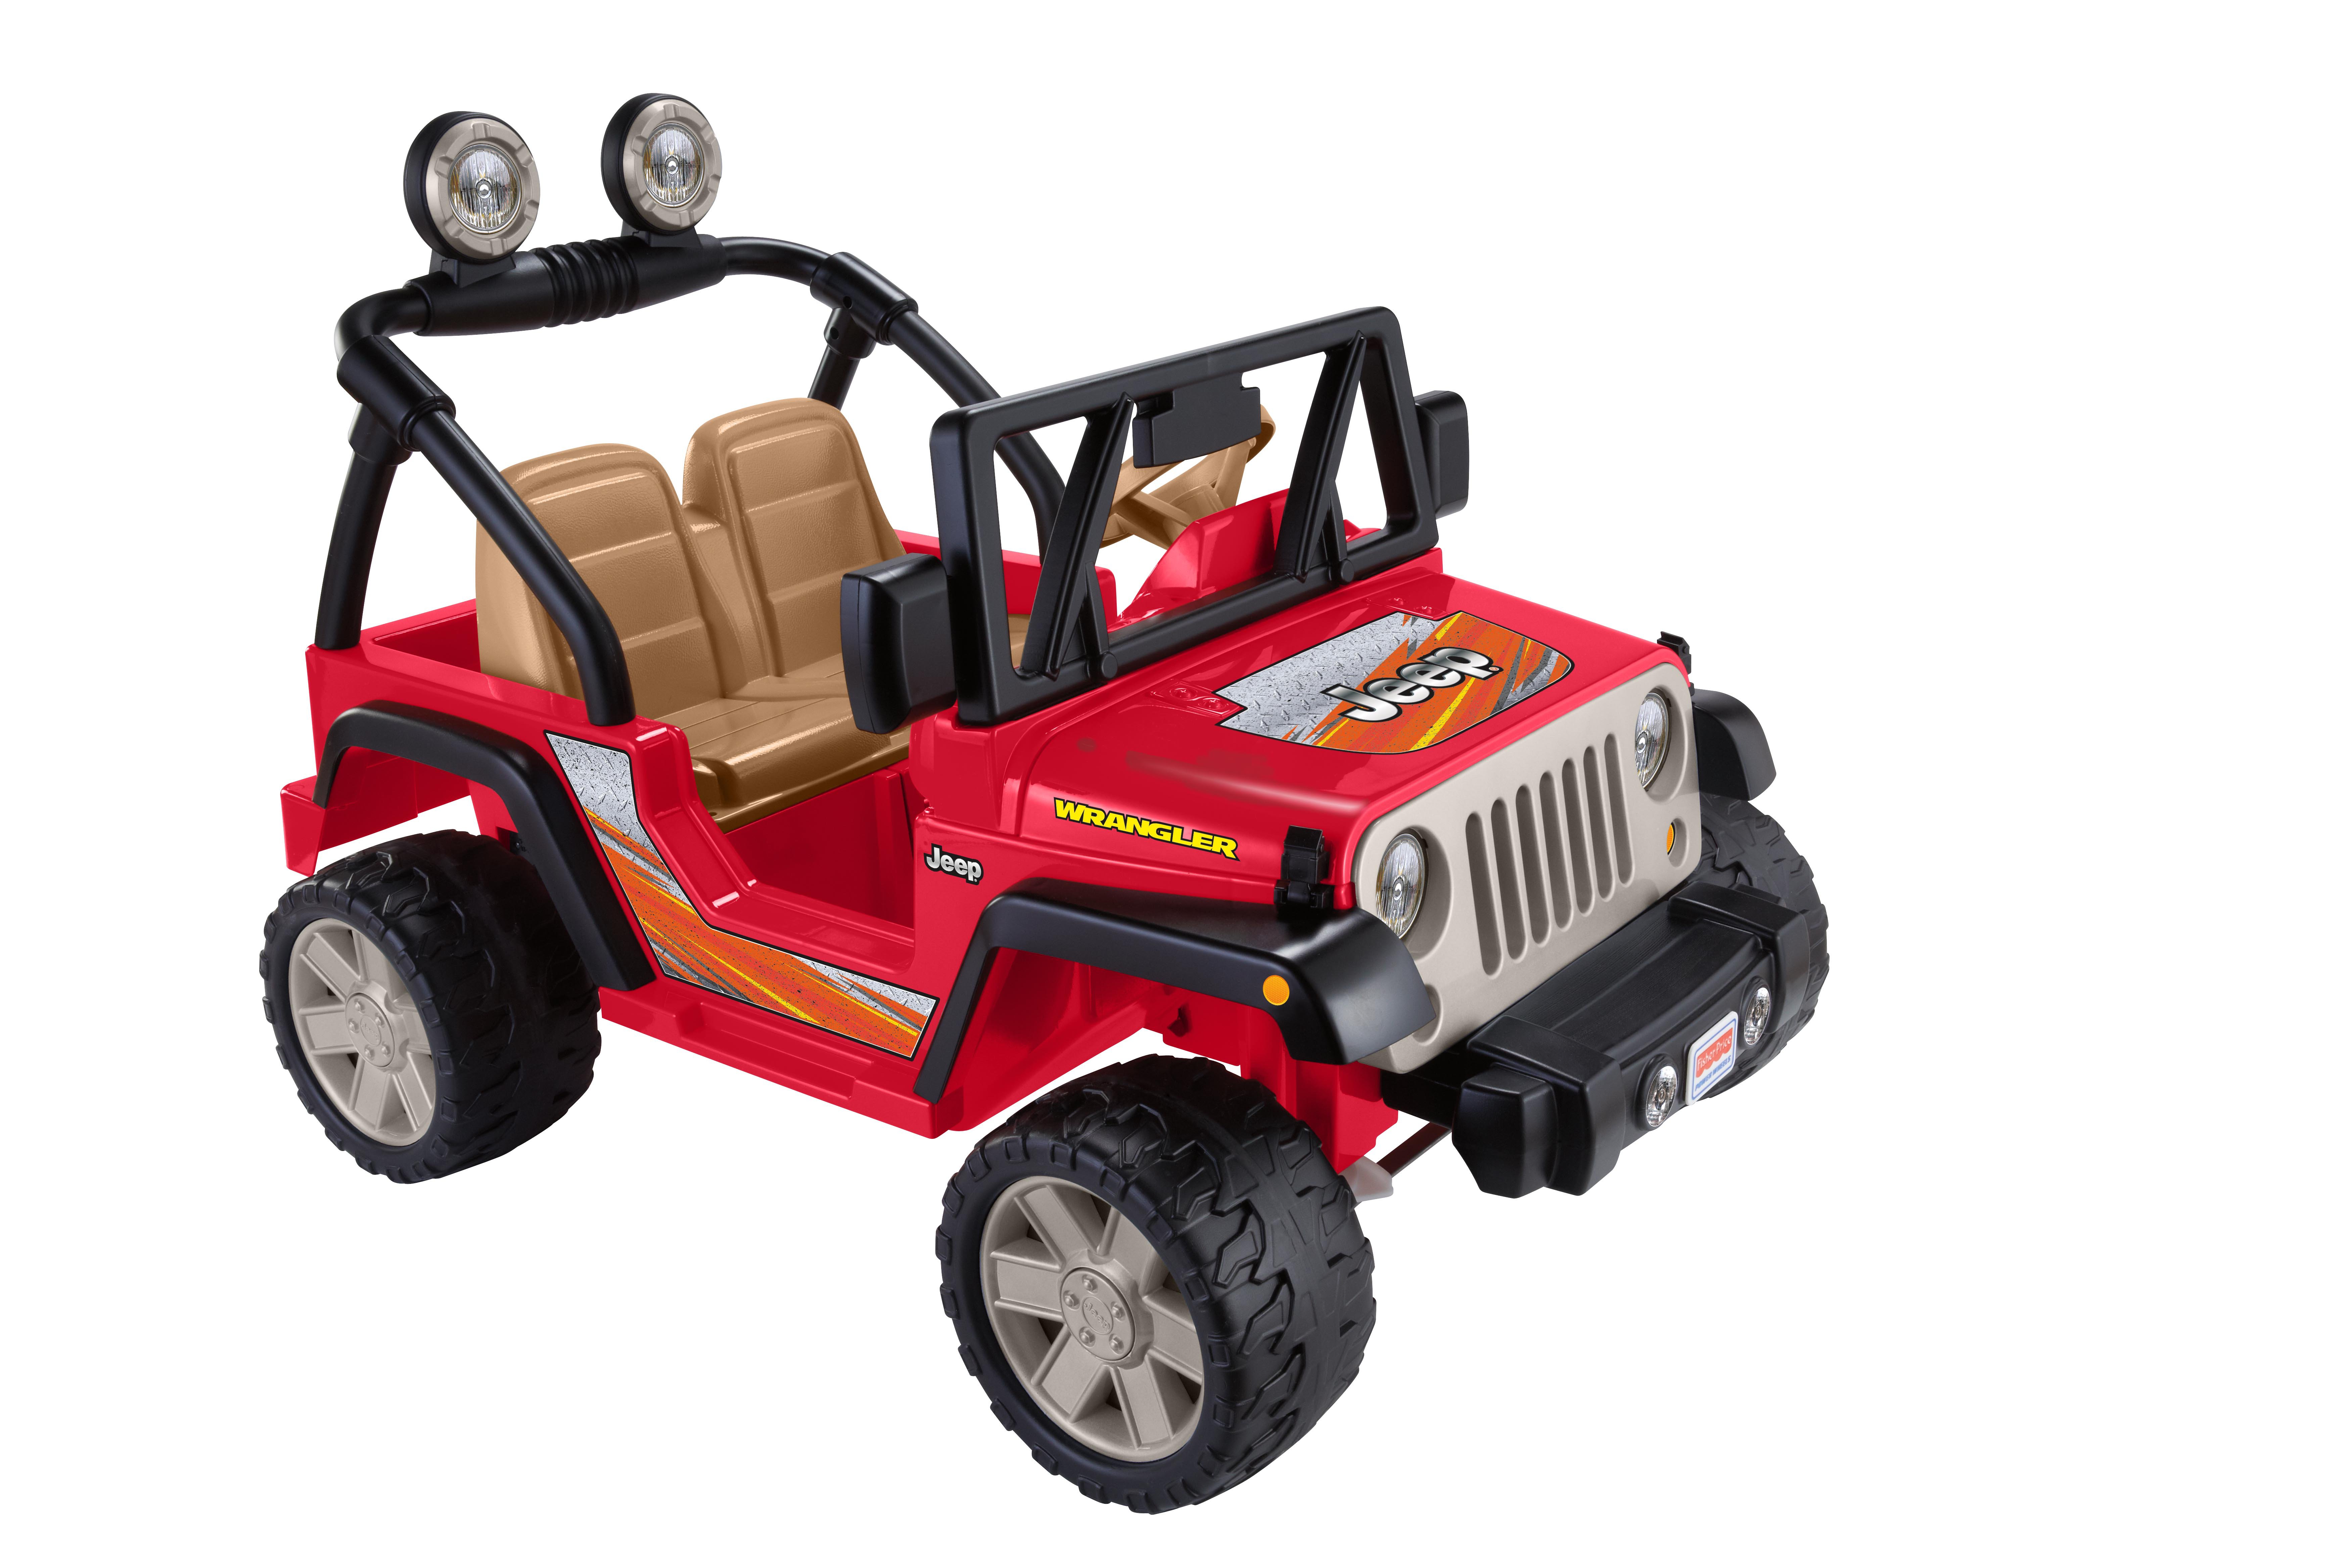 Fisher-Price Power Wheels Jeep Wrangler Battery Powered Riding Toy ...